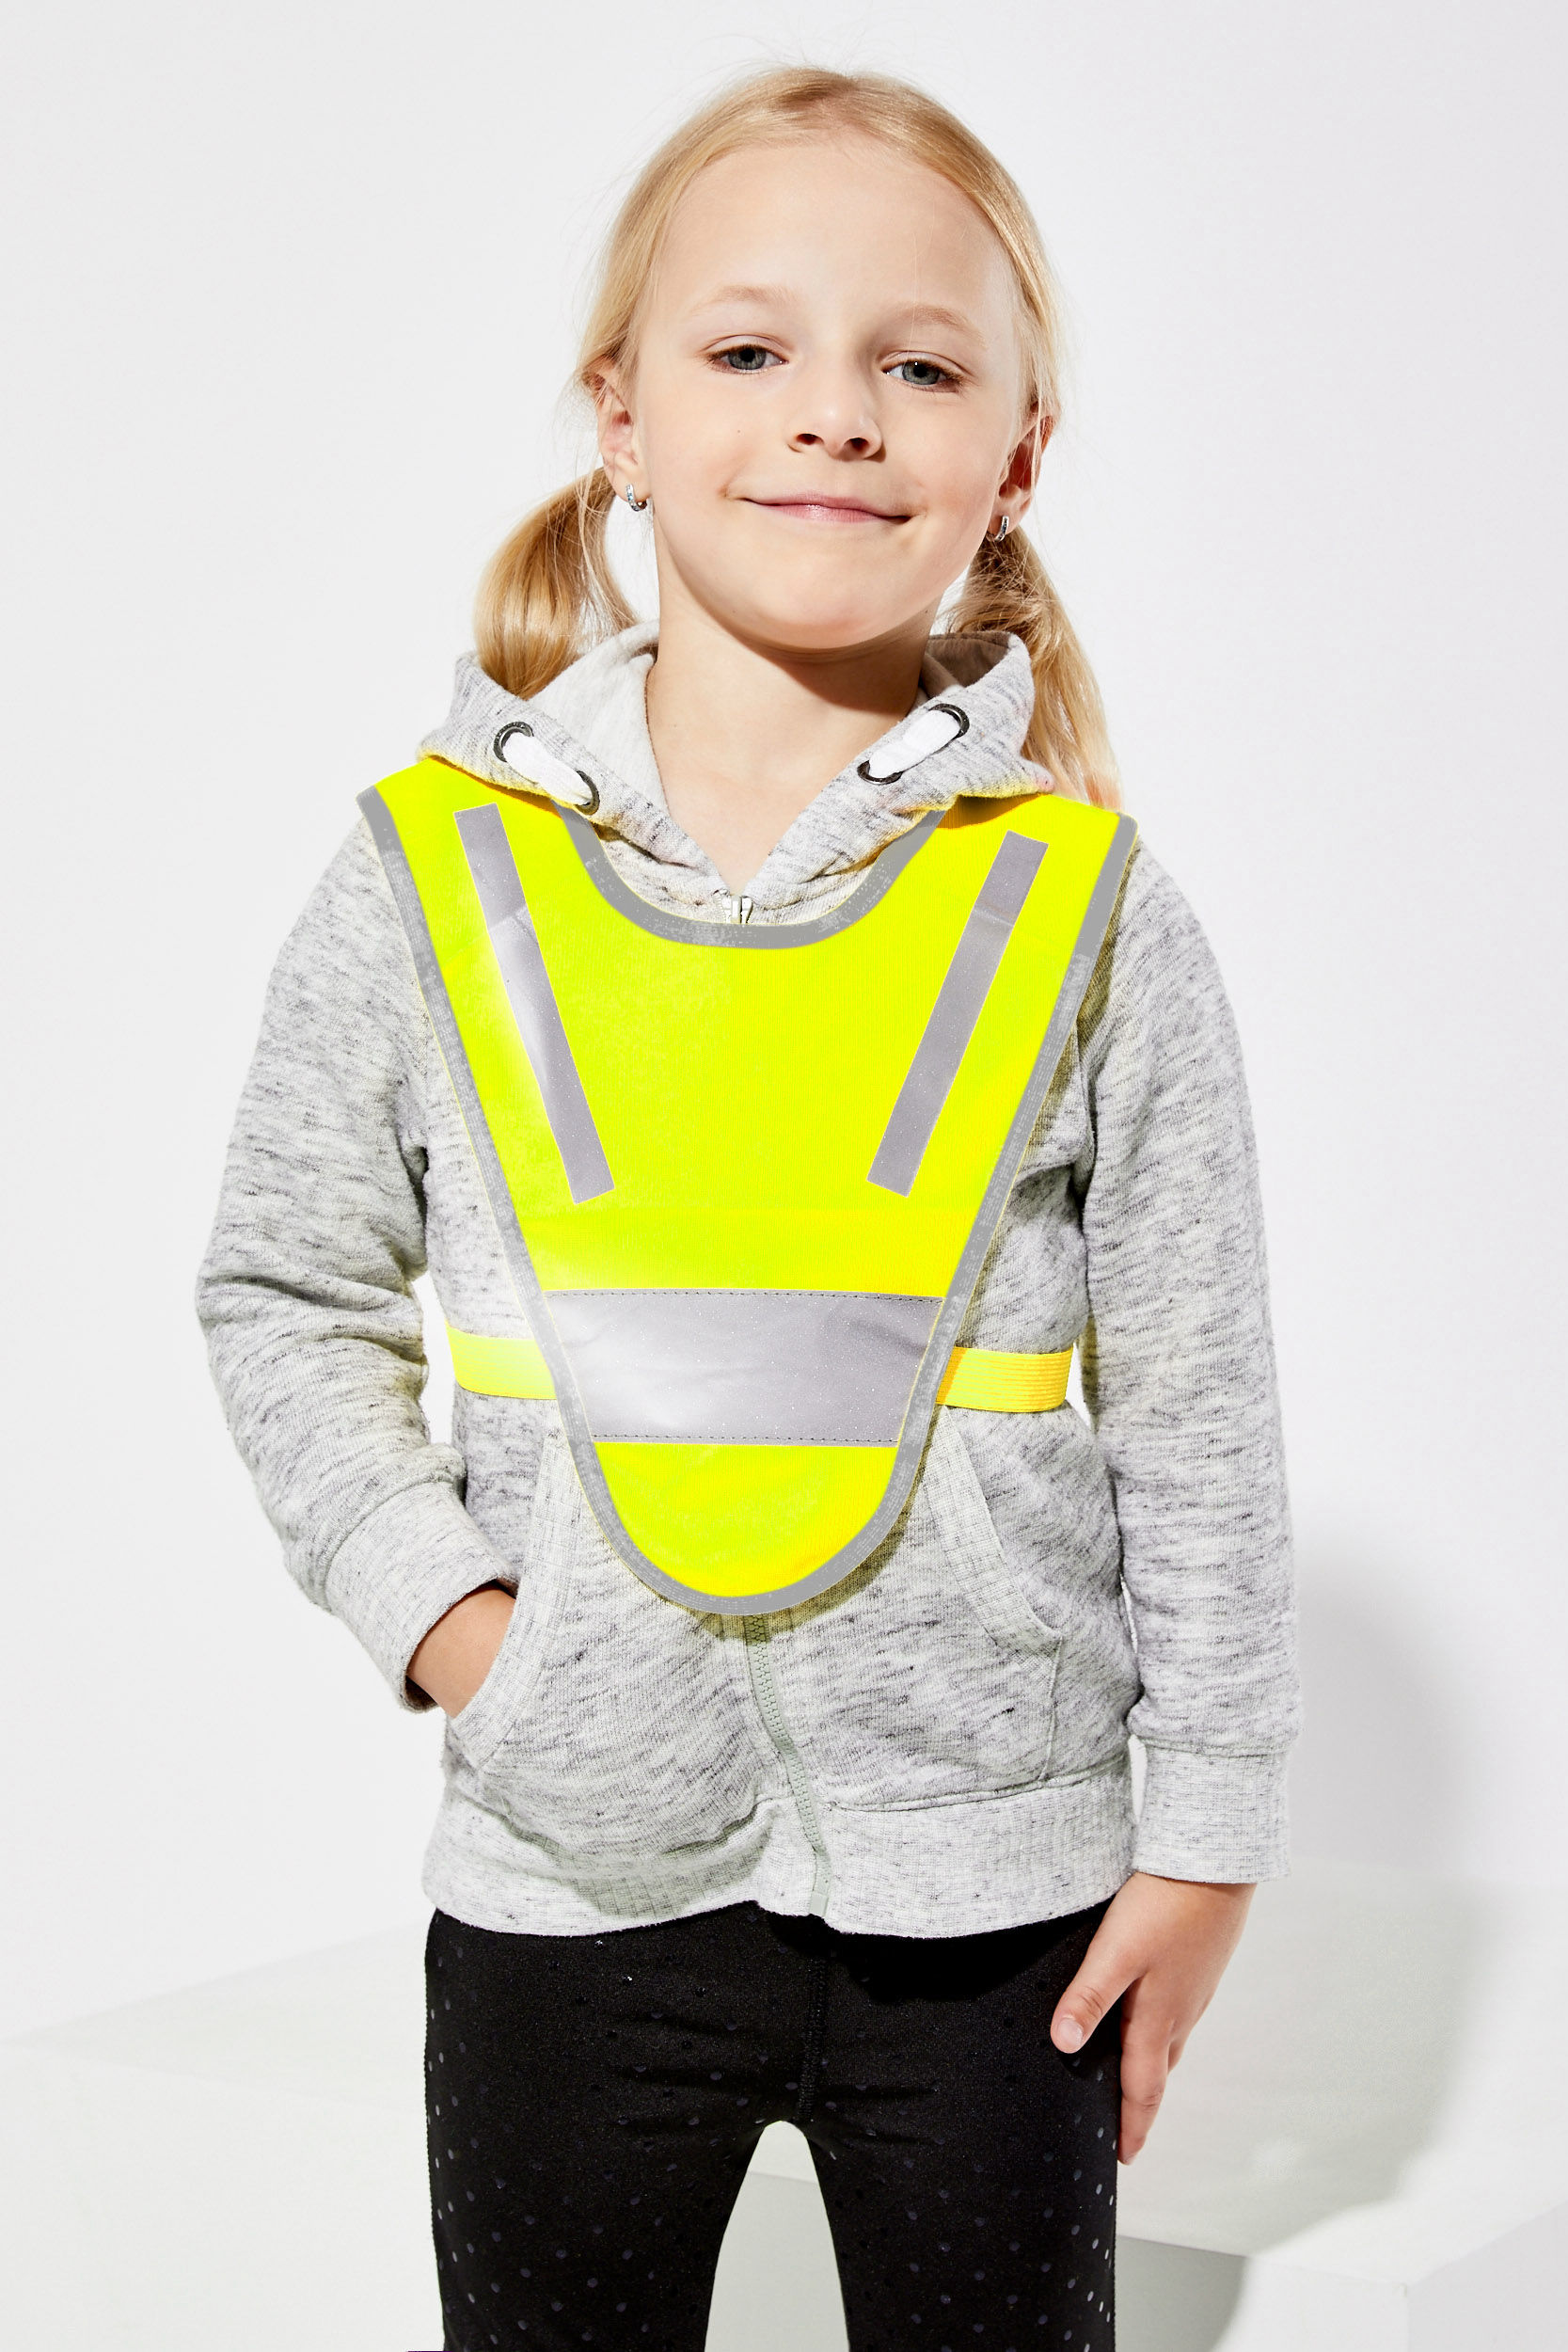 Best product for safety kid